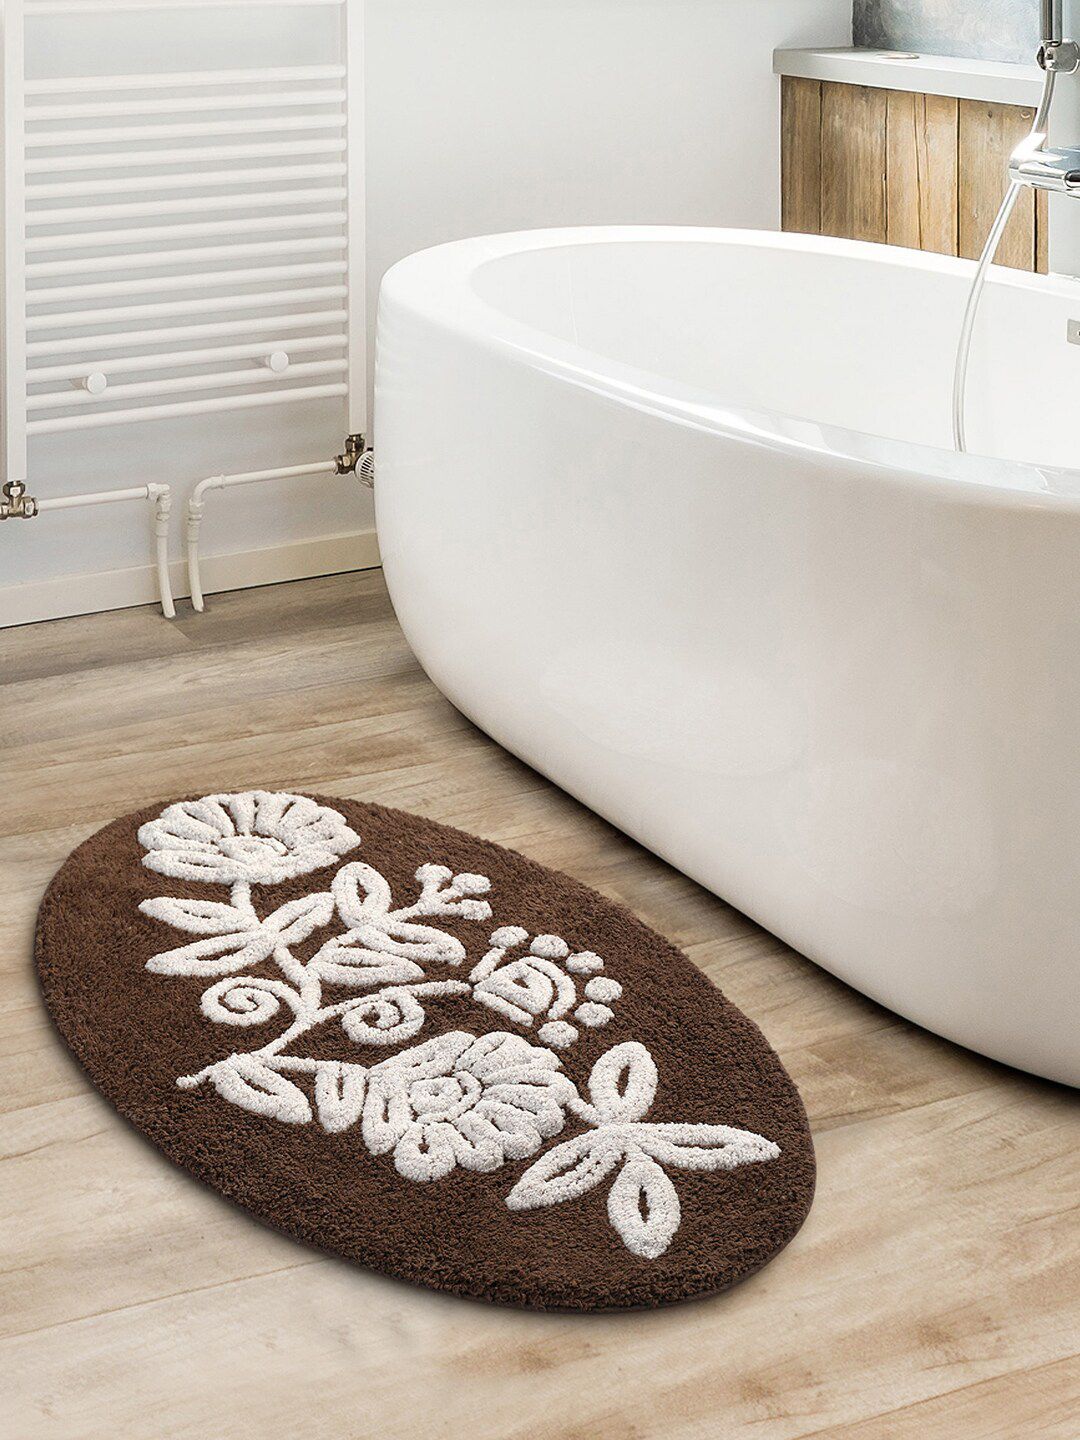 Saral Home Brown & White Handmade Oval-Shaped Bathmat Price in India